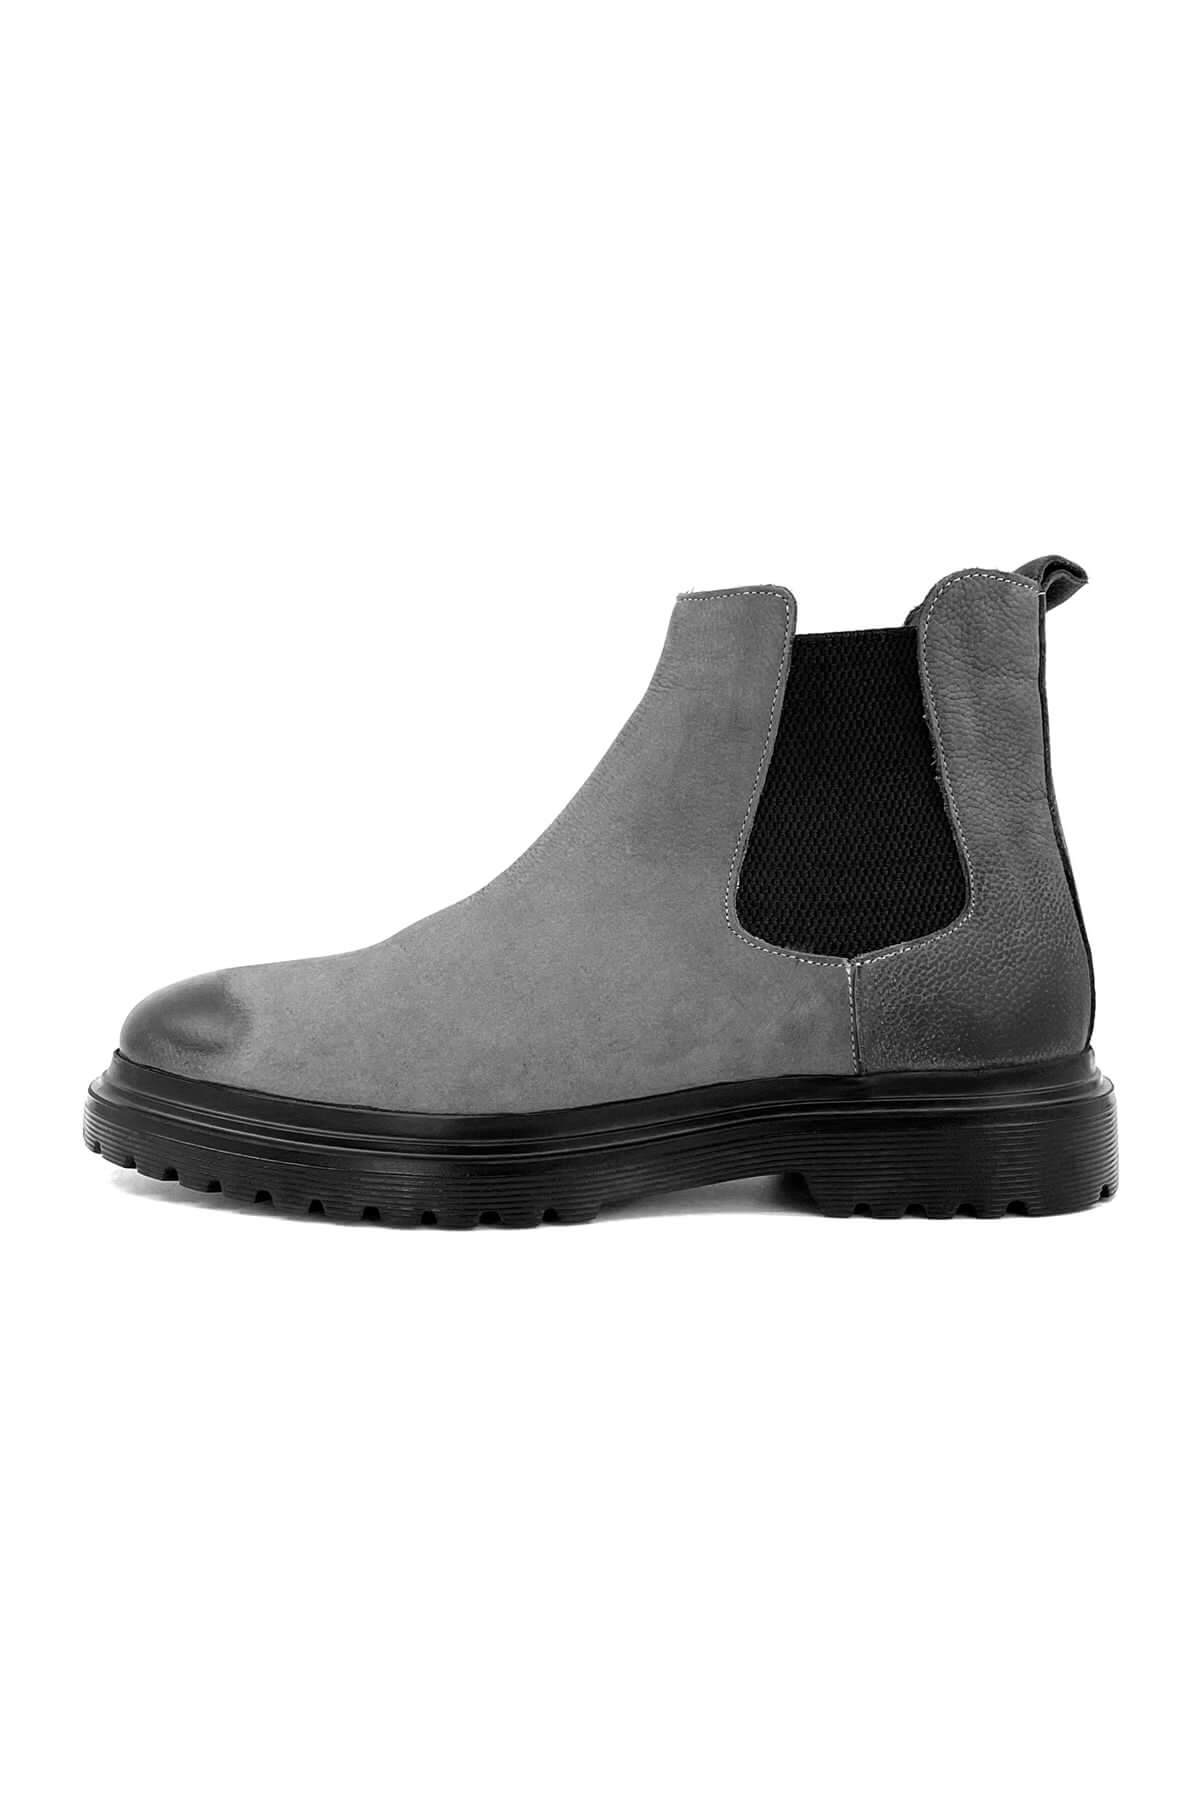 Nubuck Leather Gray Boots